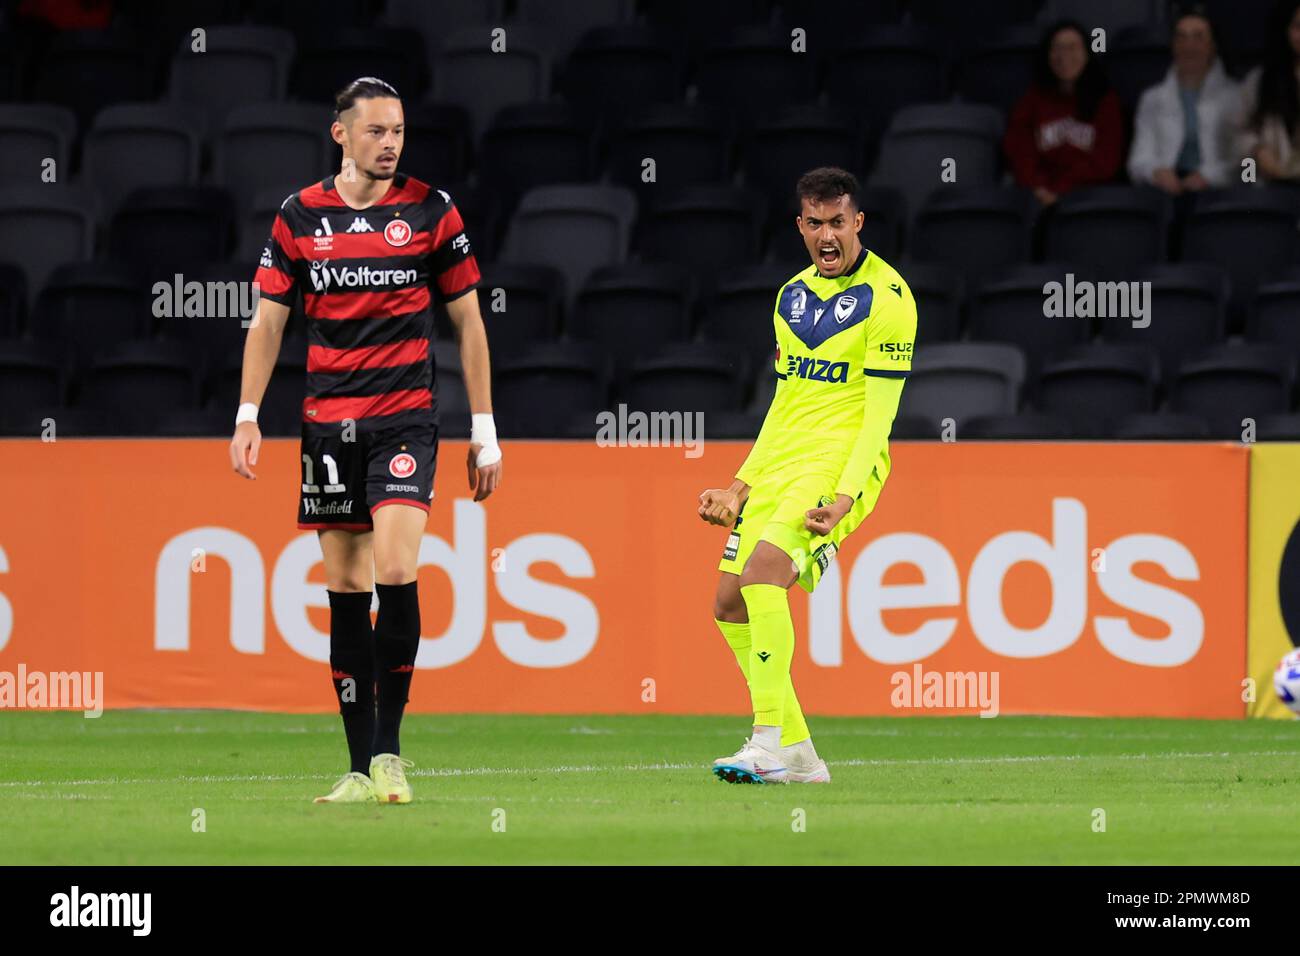 https://c8.alamy.com/comp/2PMWM8D/nishan-velupillay-of-victory-celebrates-a-goal-during-the-a-league-mens-soccer-match-between-the-western-sydney-wanderers-and-the-melbourne-victory-at-commbank-stadium-in-sydney-saturday-april-15-2023-aap-imagemark-evans-no-archiving-editorial-use-only-strictly-editorial-use-only-no-commercial-use-no-books-2PMWM8D.jpg